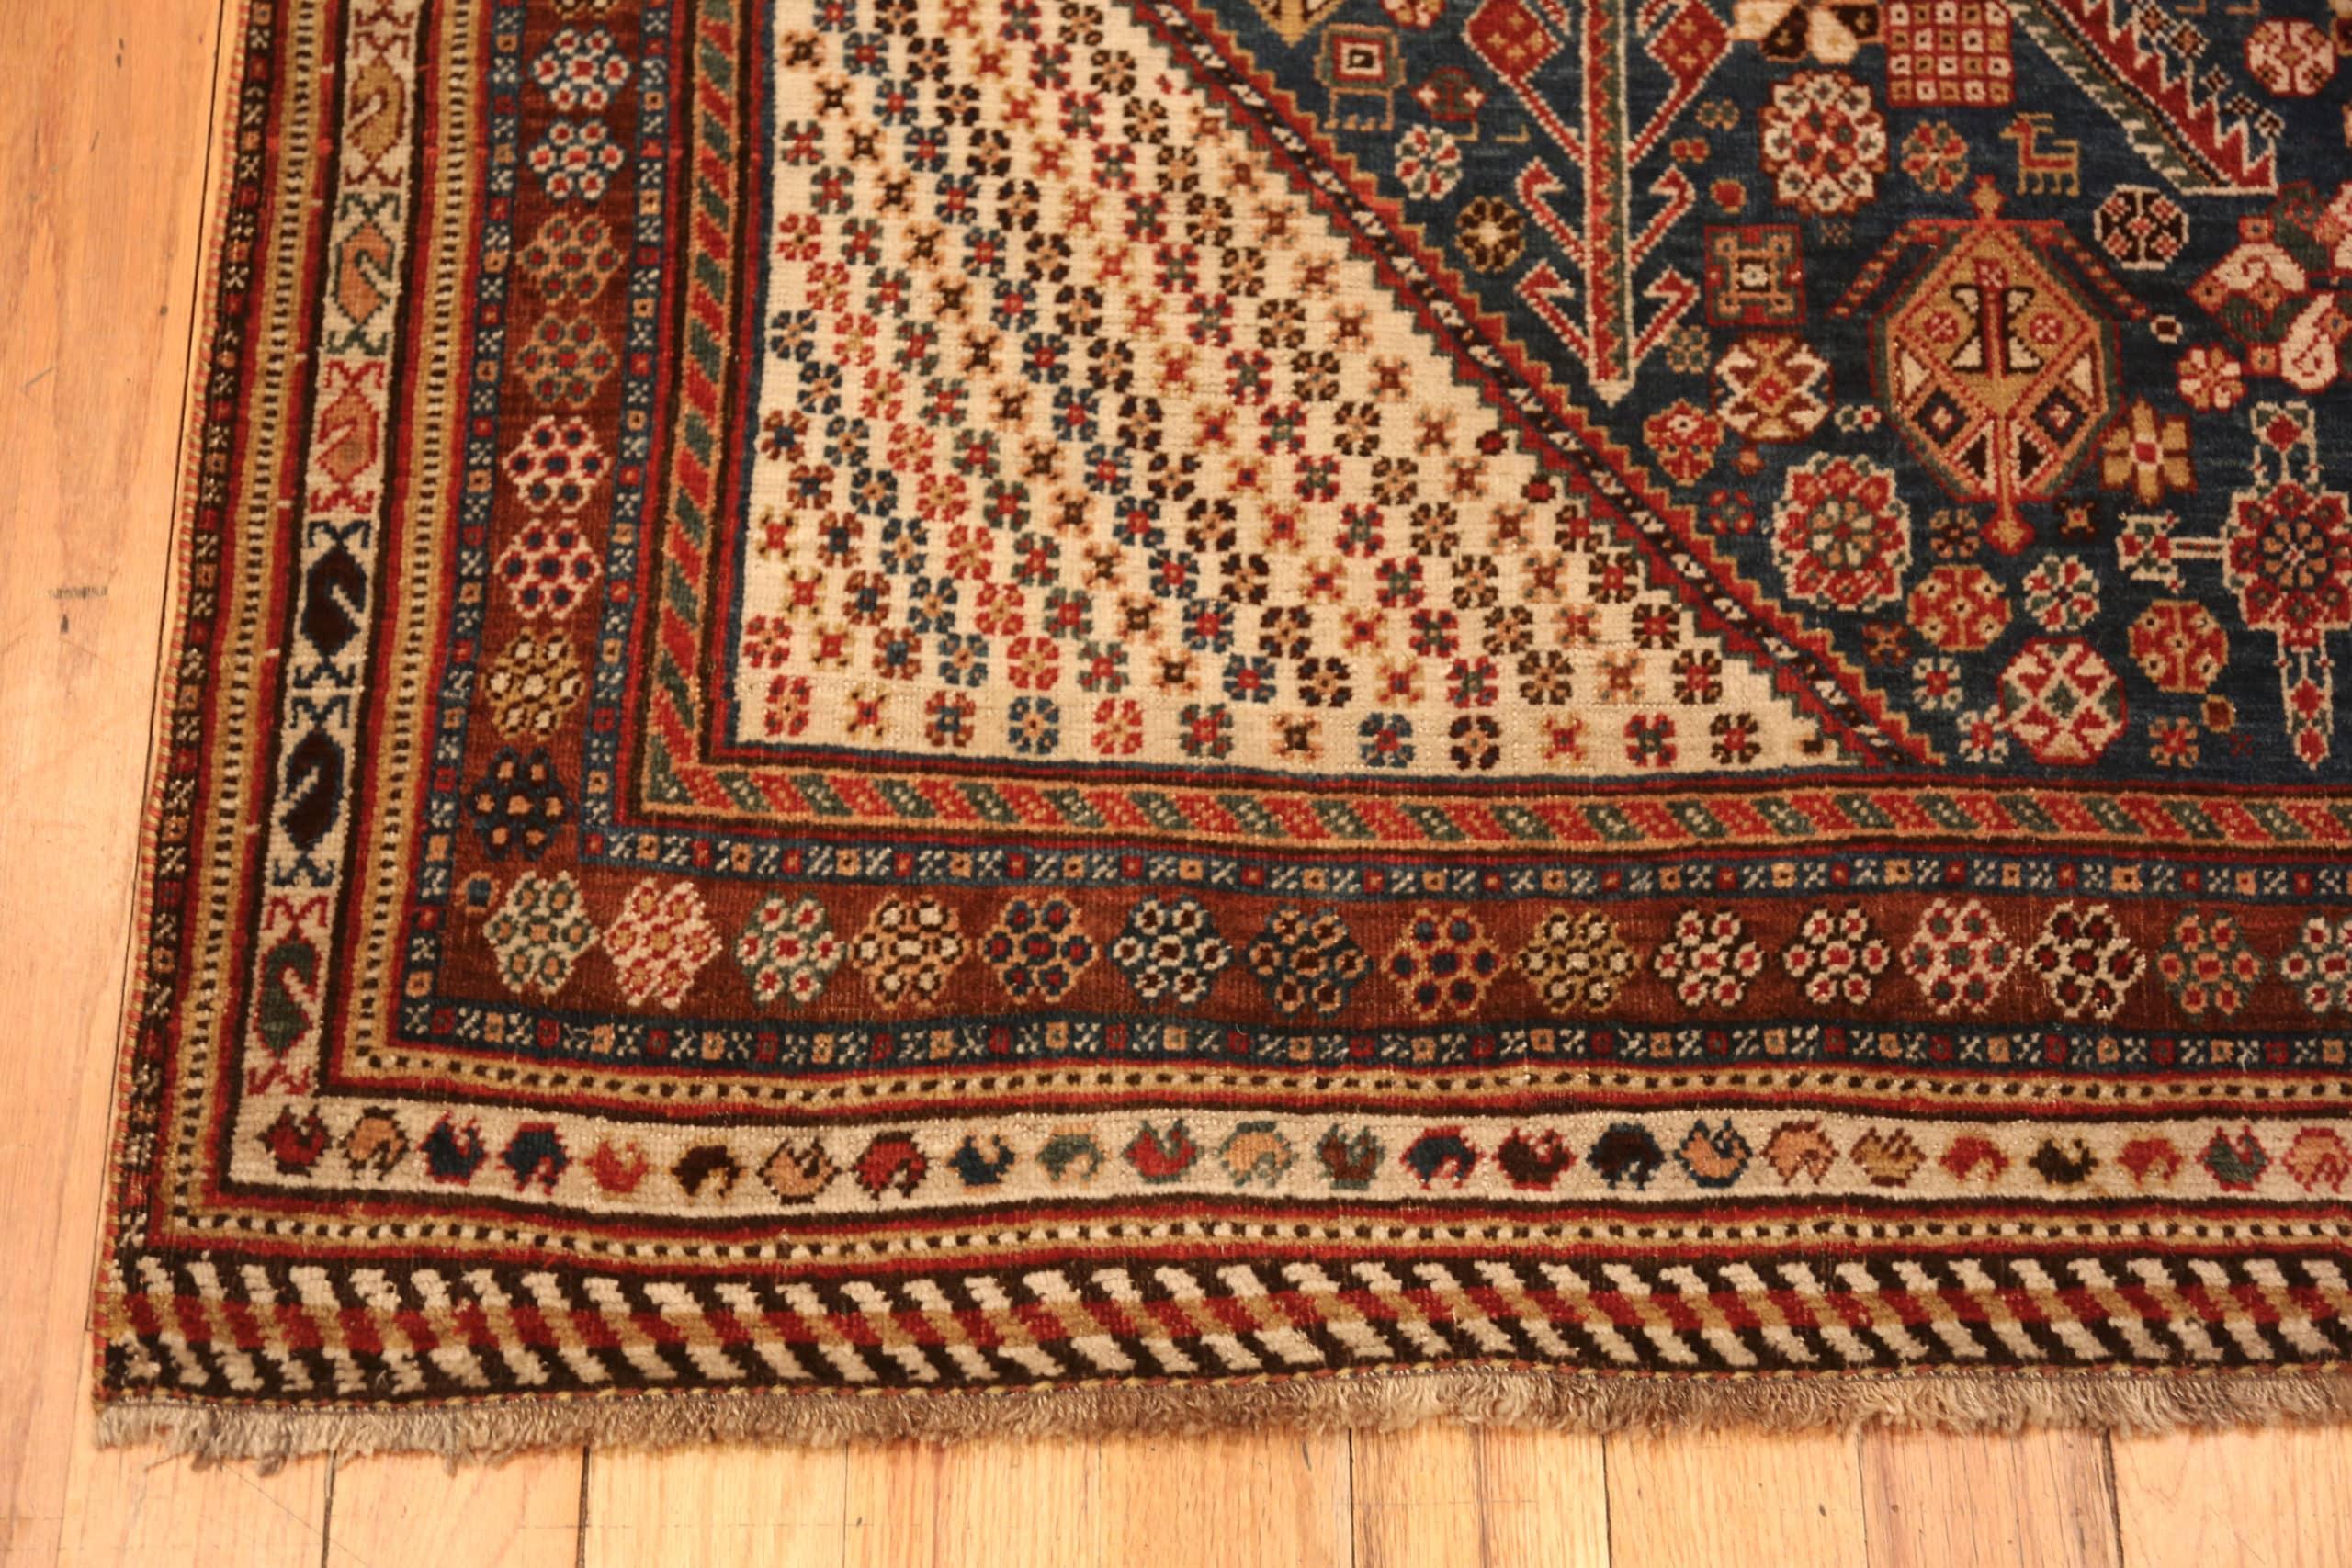 Tribal Nazmiyal Collection Antique Persian Qashqai Rug. Size: 4 ft 10 in x 7 ft 2 in